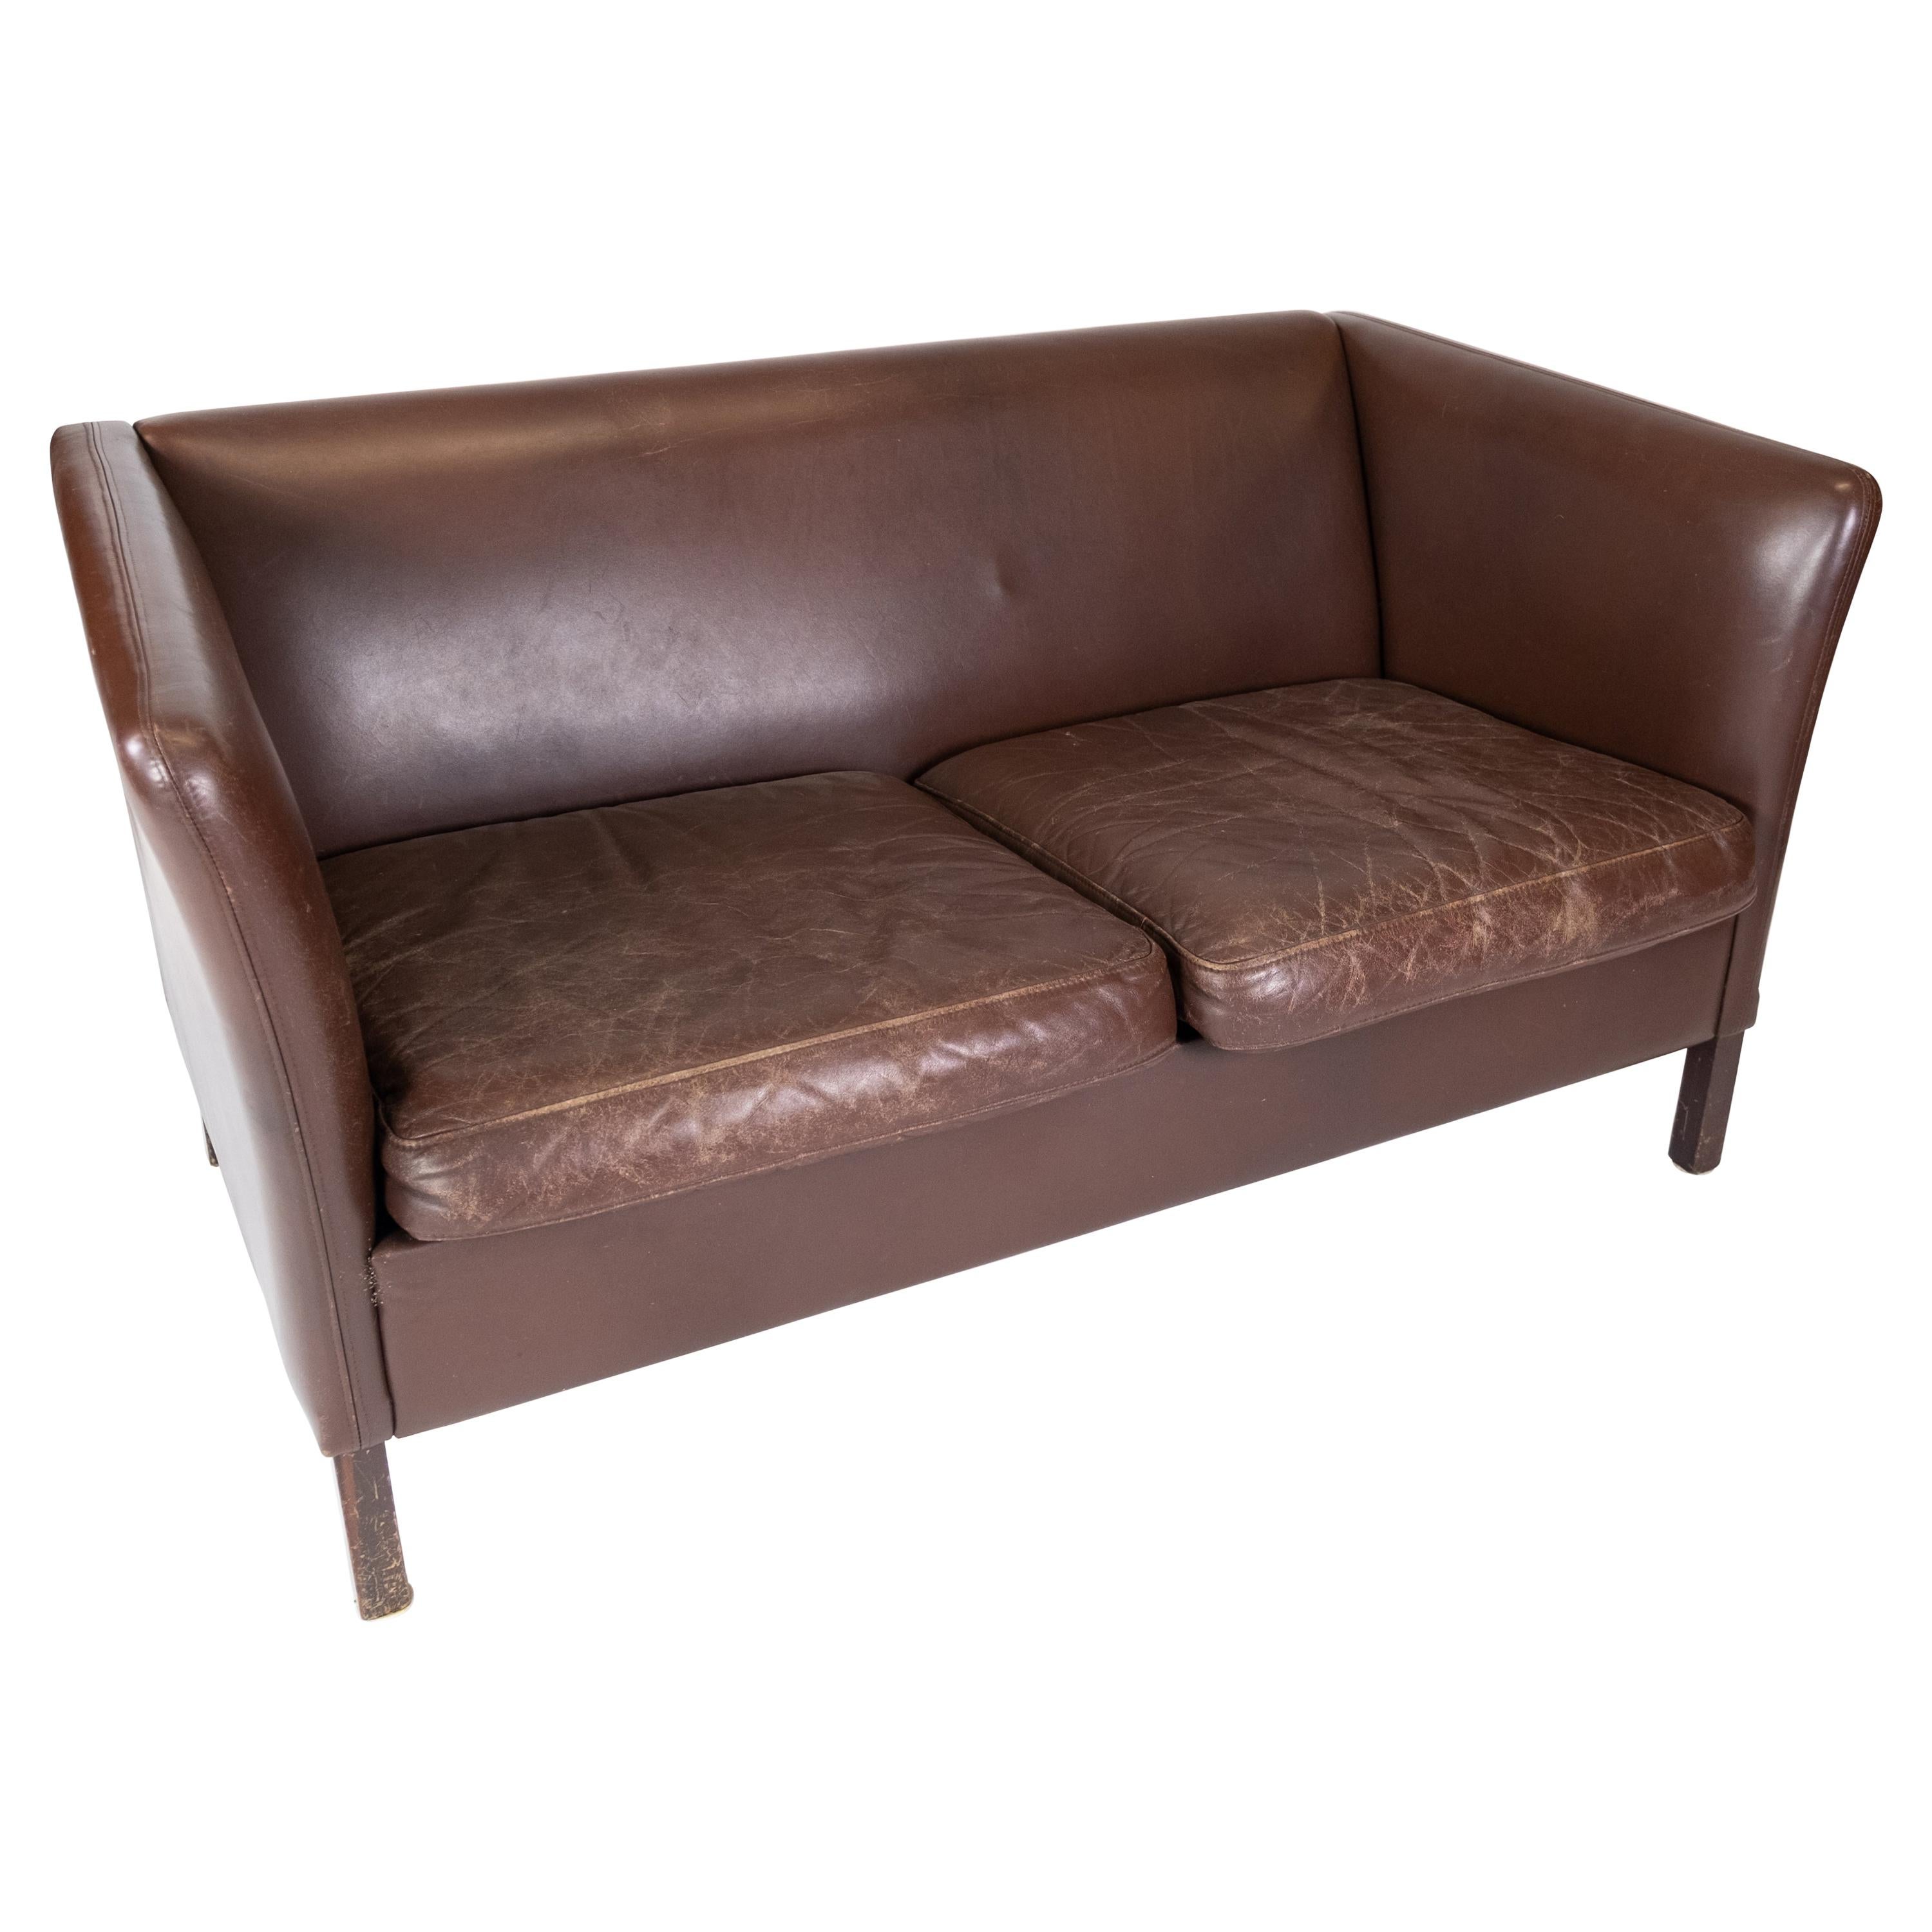 Two Seater Sofa Upholstered with Dark Brown Leather of Danish Design, 1960s For Sale